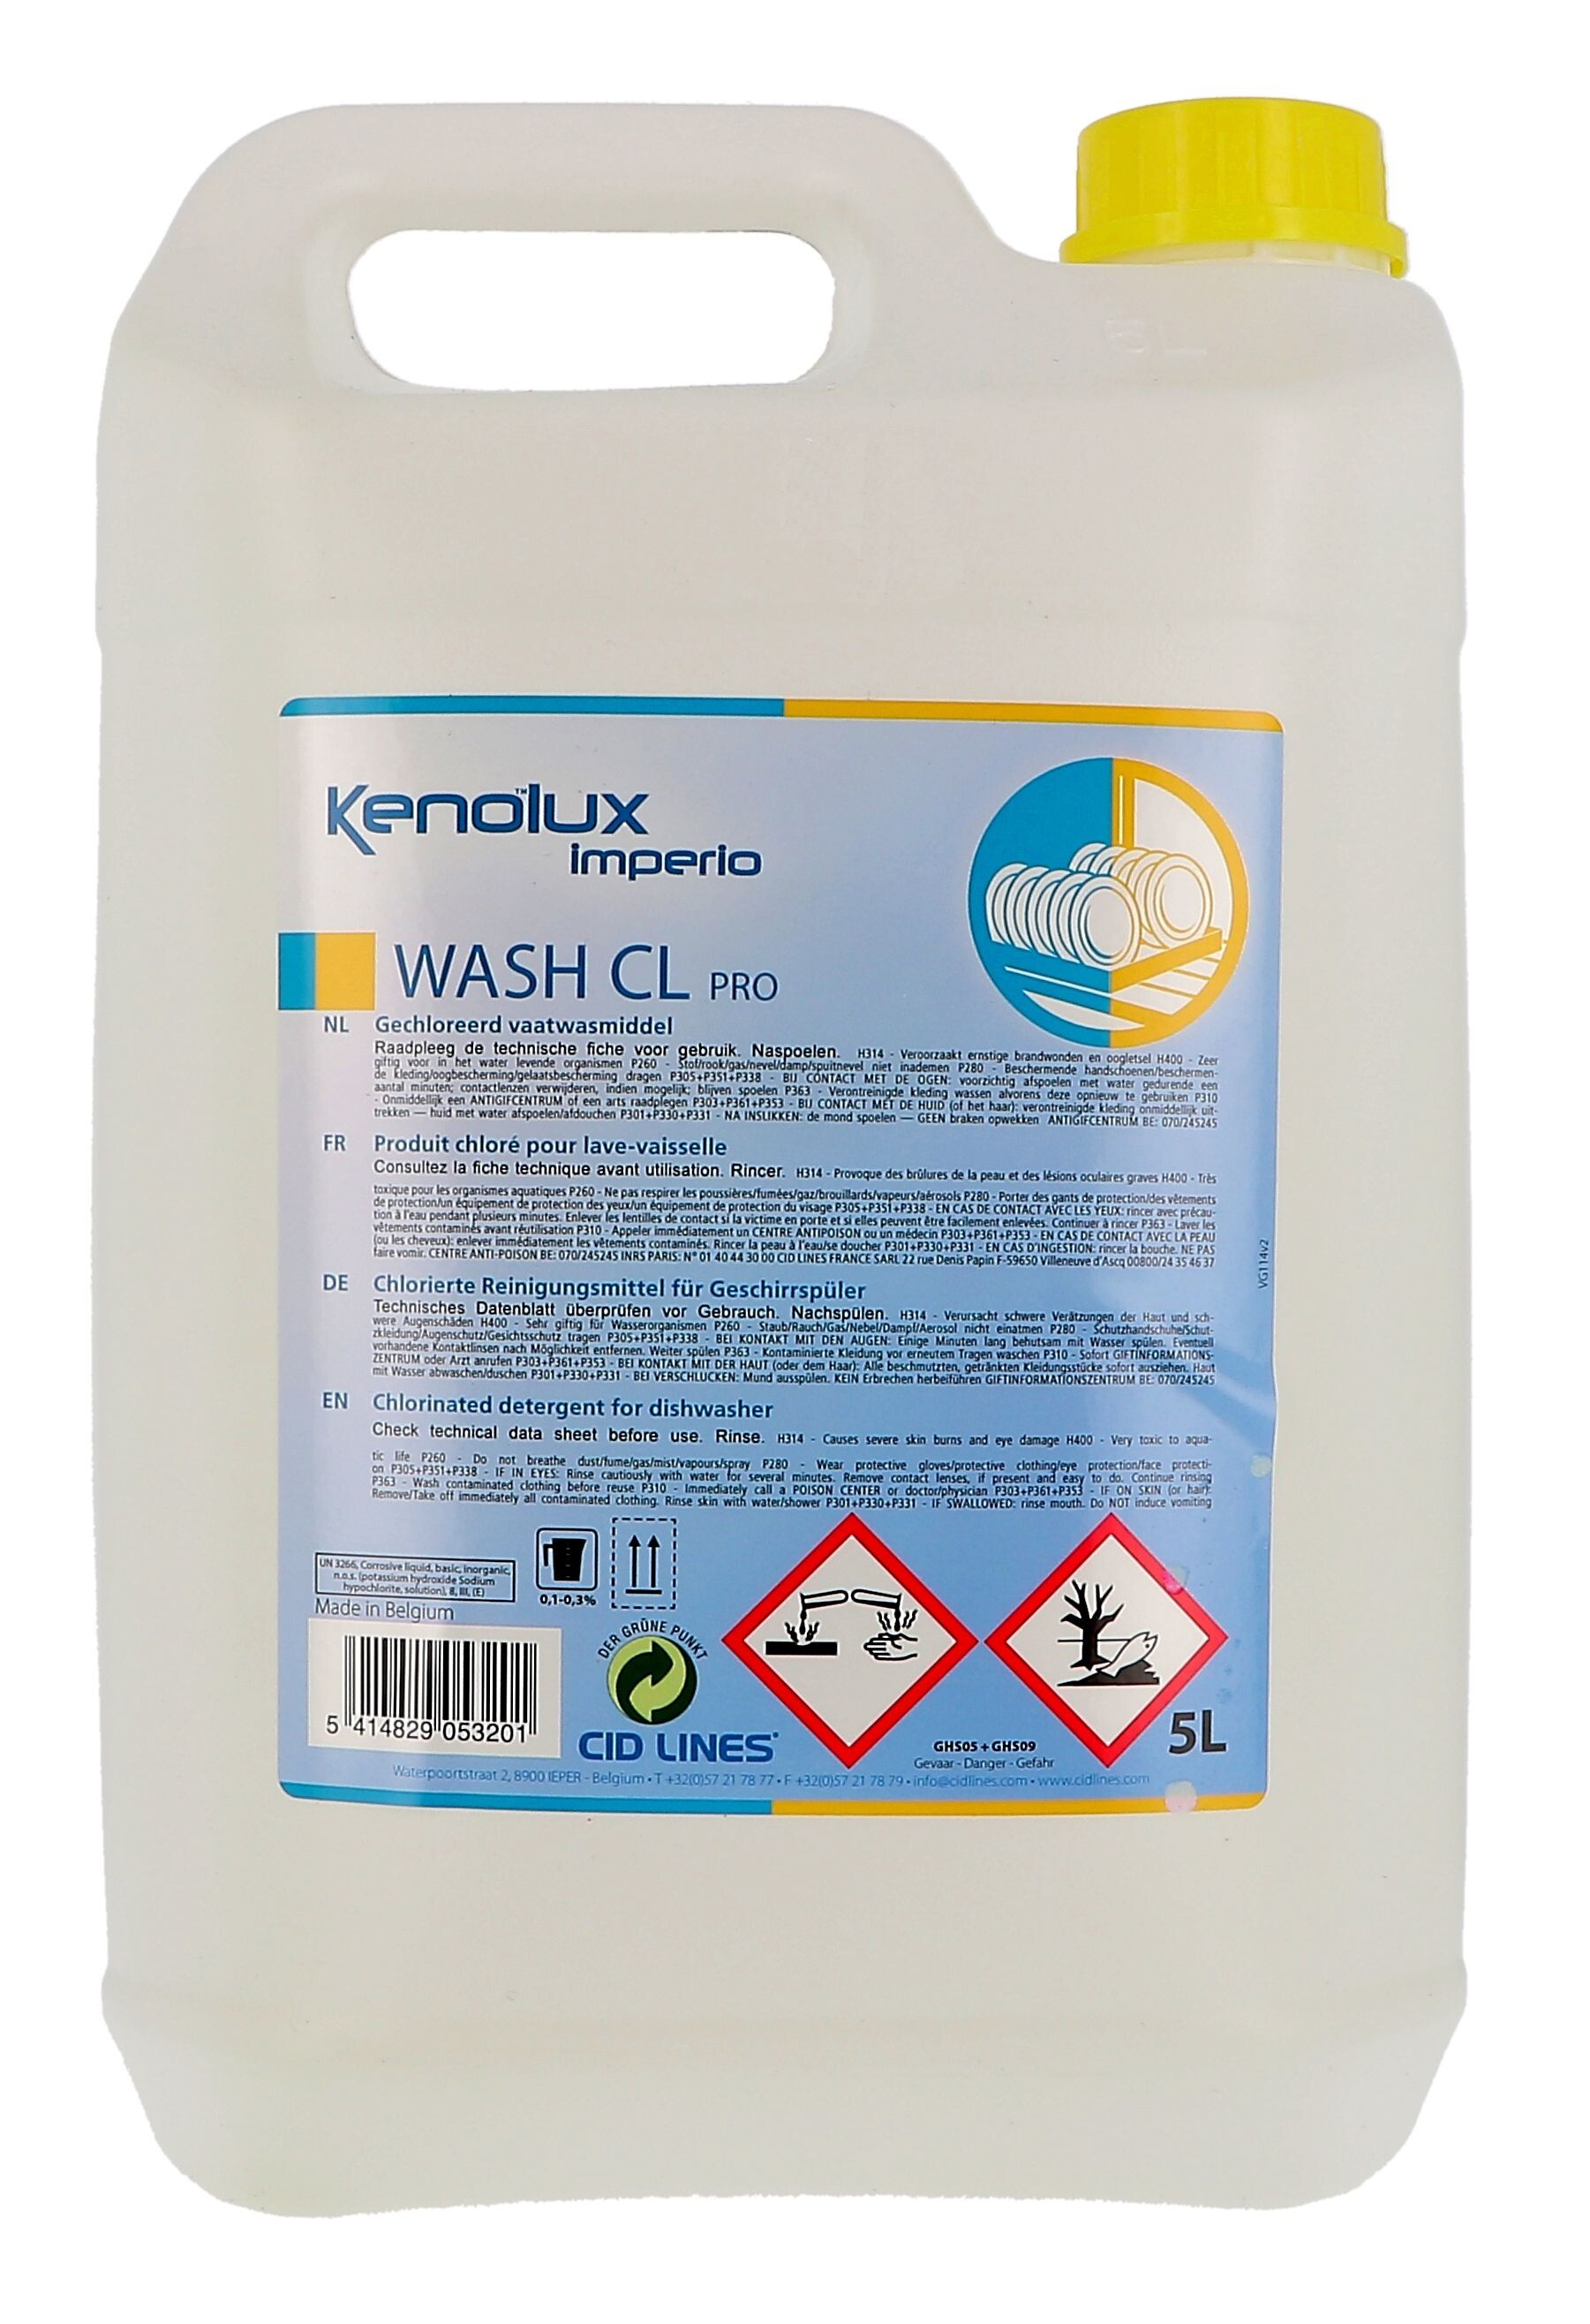 Kenolux Wash CL 5L Chlorinated cleaning product for automated dish washing Cid Lines (Vaatwasproducten)